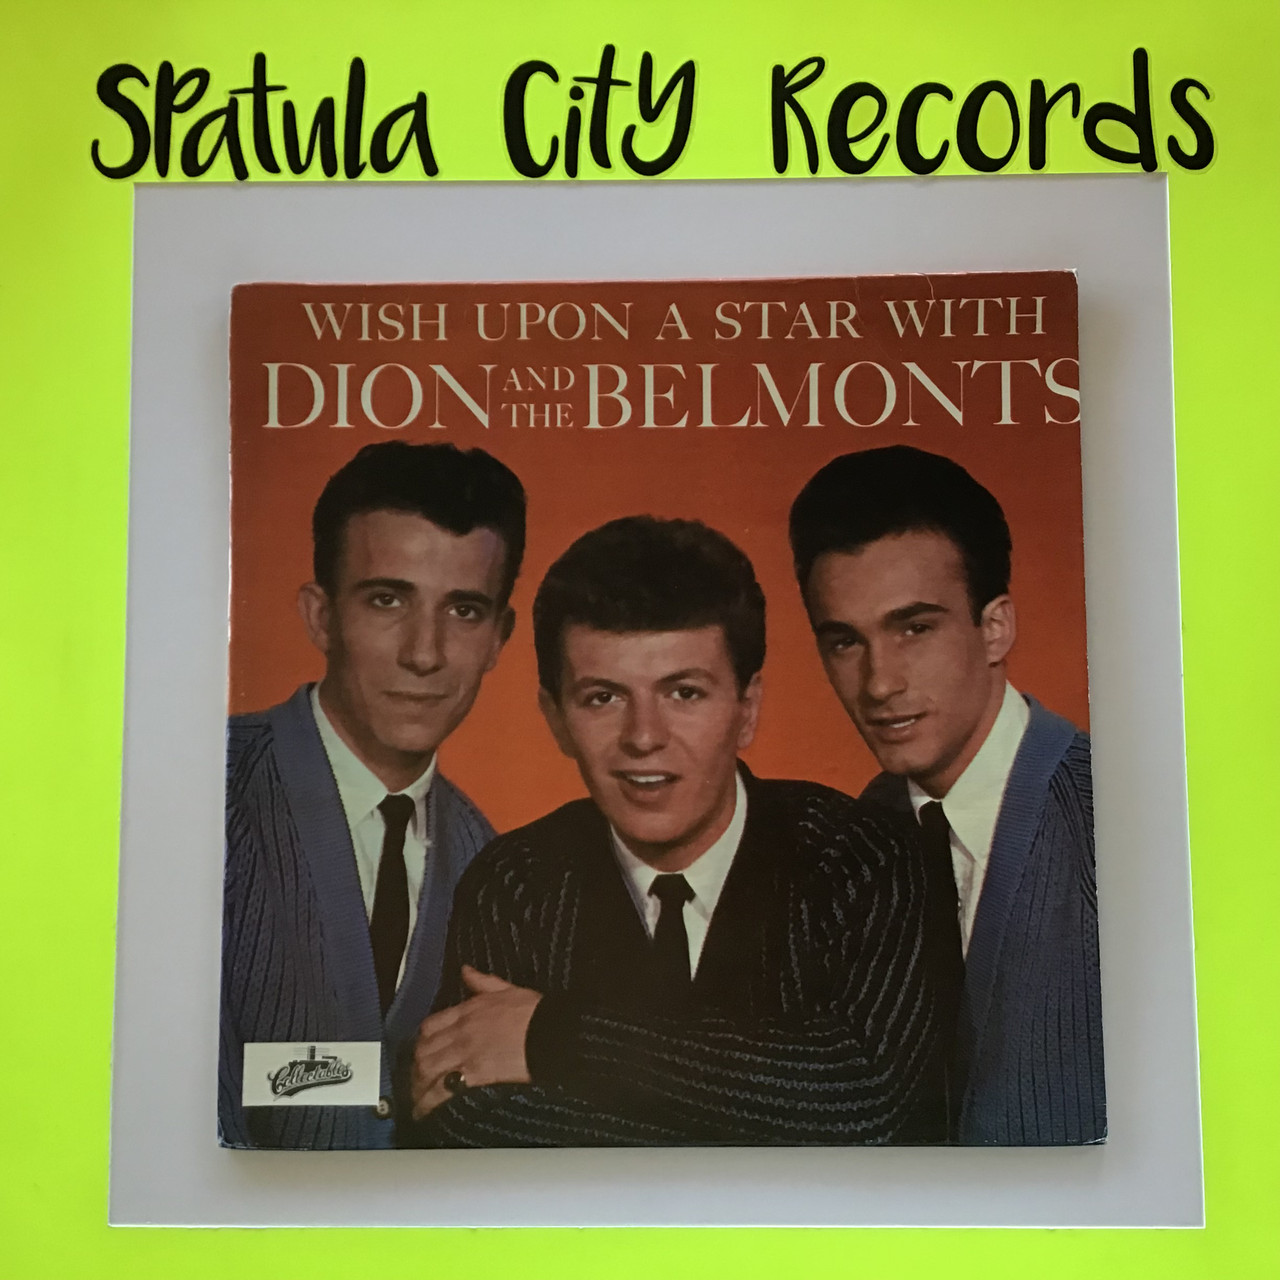 Dion and The Belmonts - Wish Upon A Star with Dion and The Belmonts - vinyl record LP